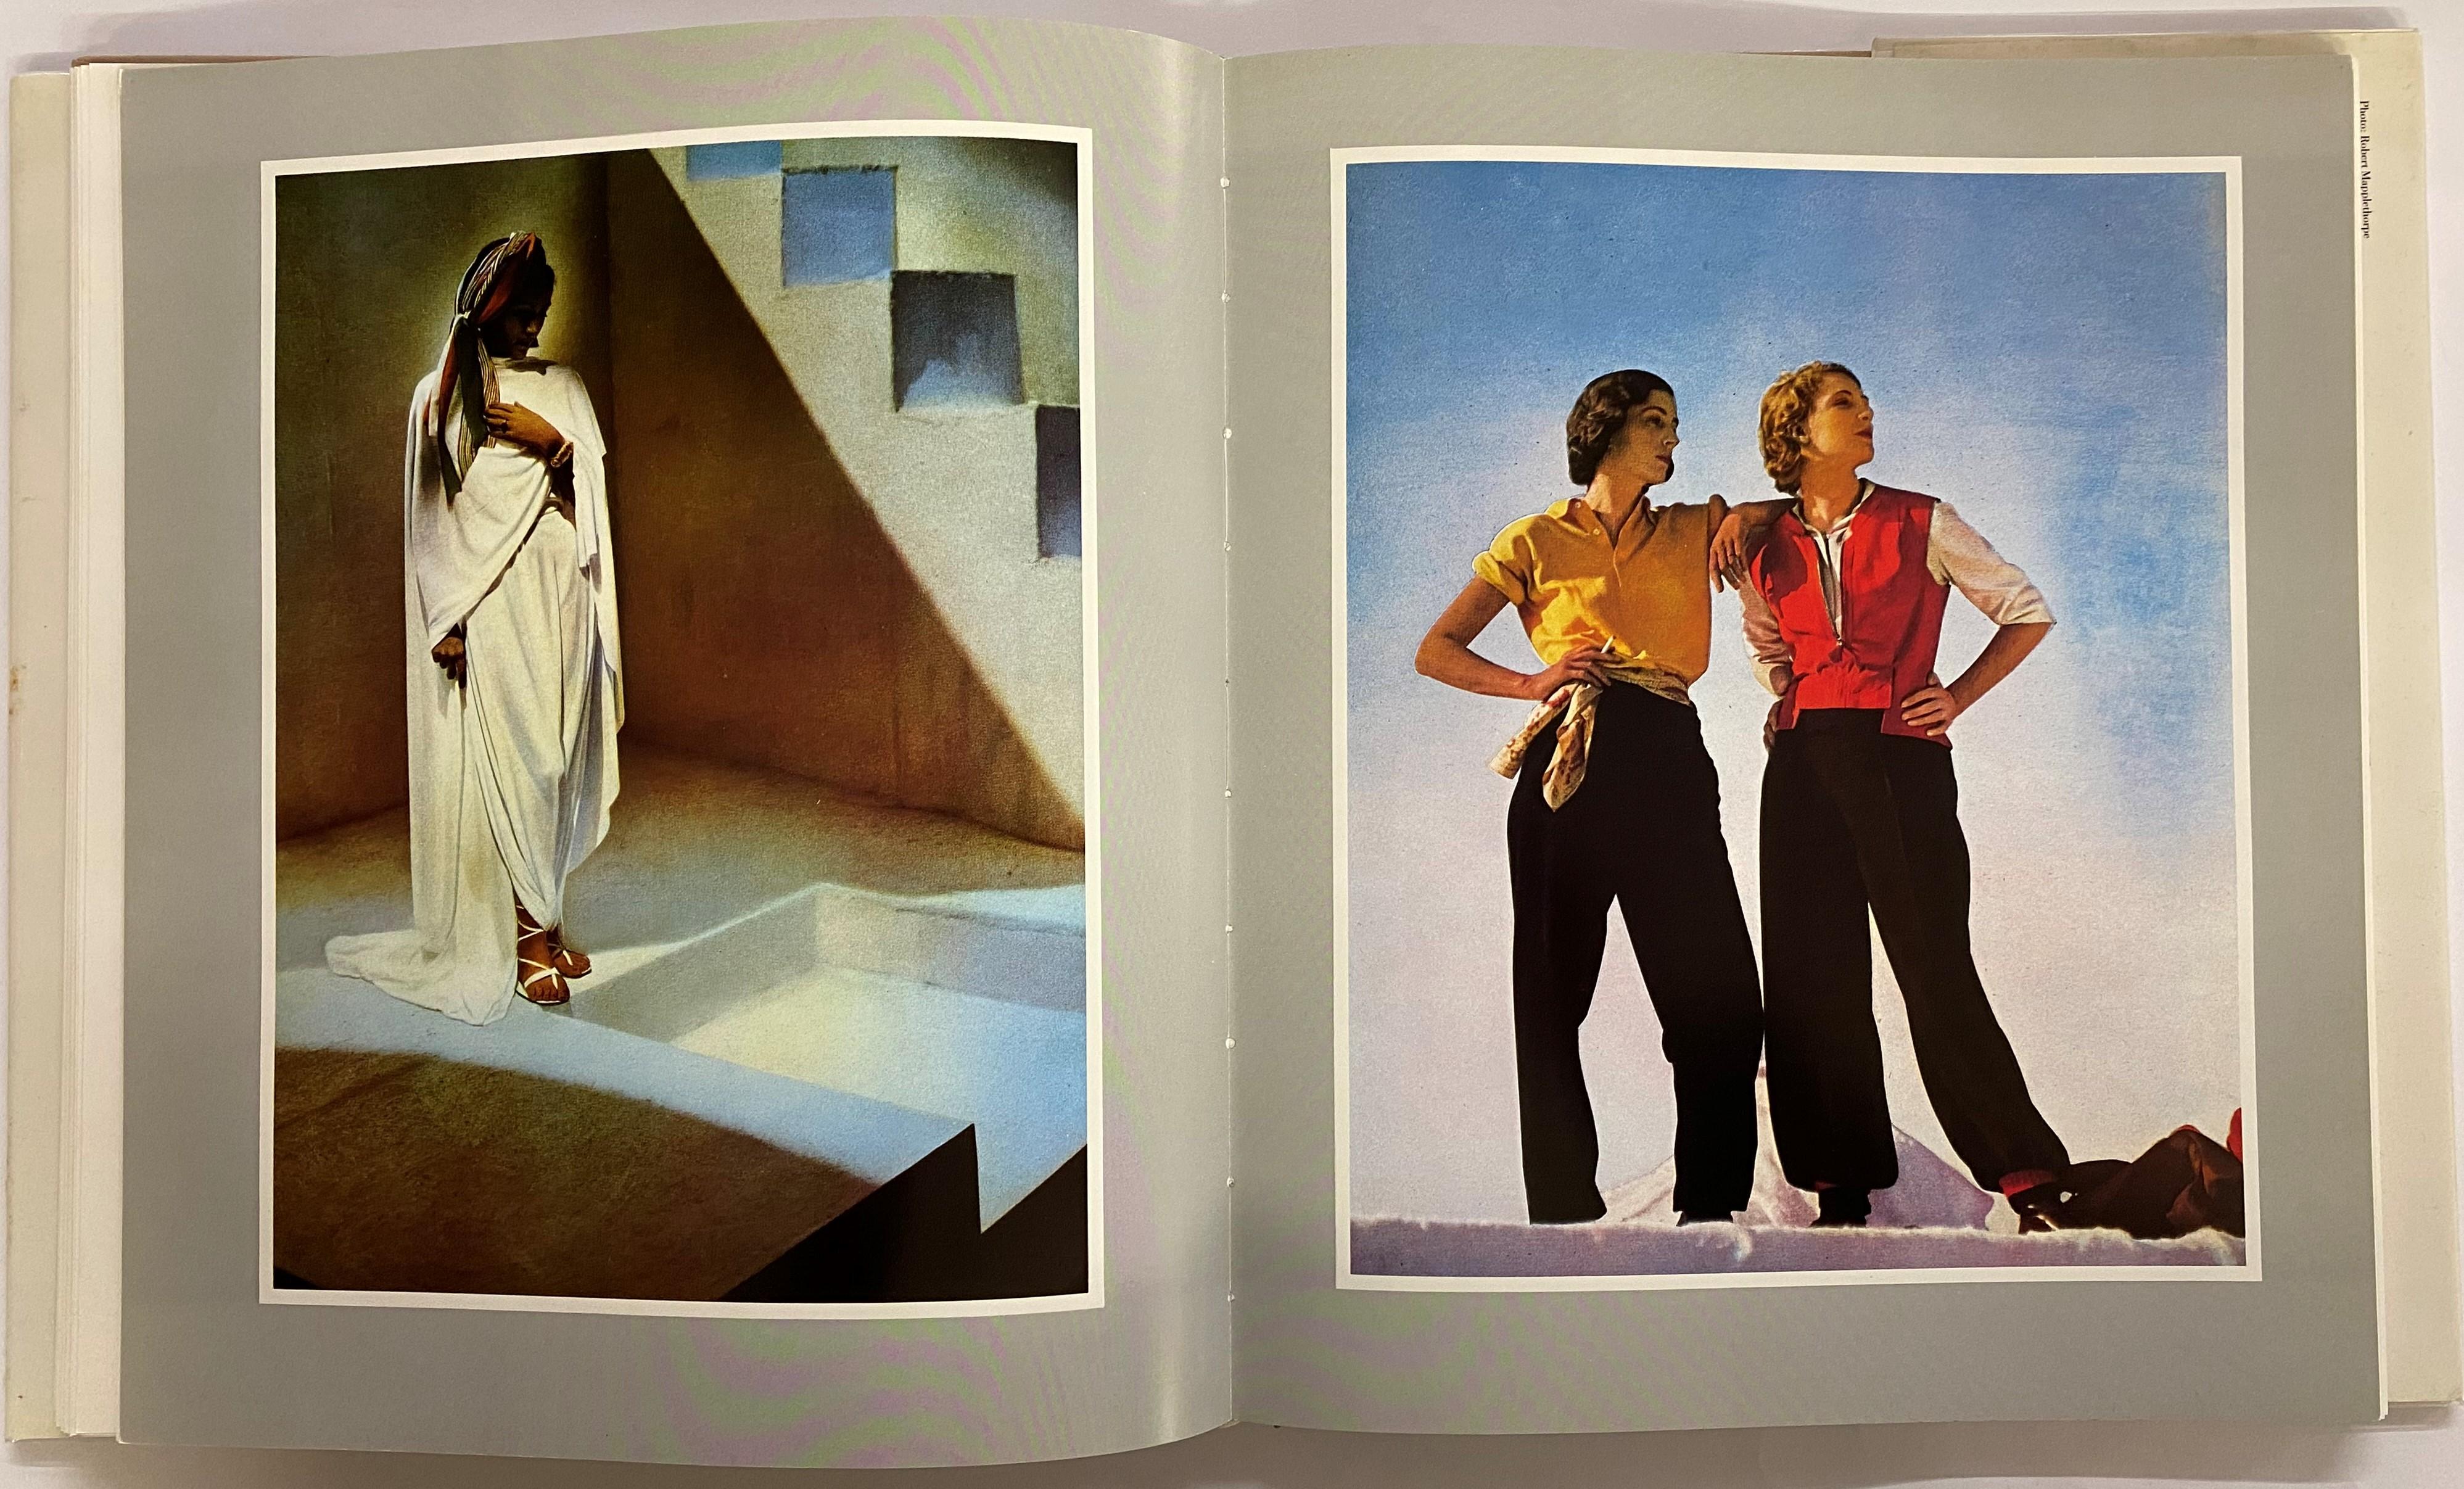 Photographic Art of Hoyningen-Huene by William A. Ewing, (Book) In Good Condition For Sale In North Yorkshire, GB